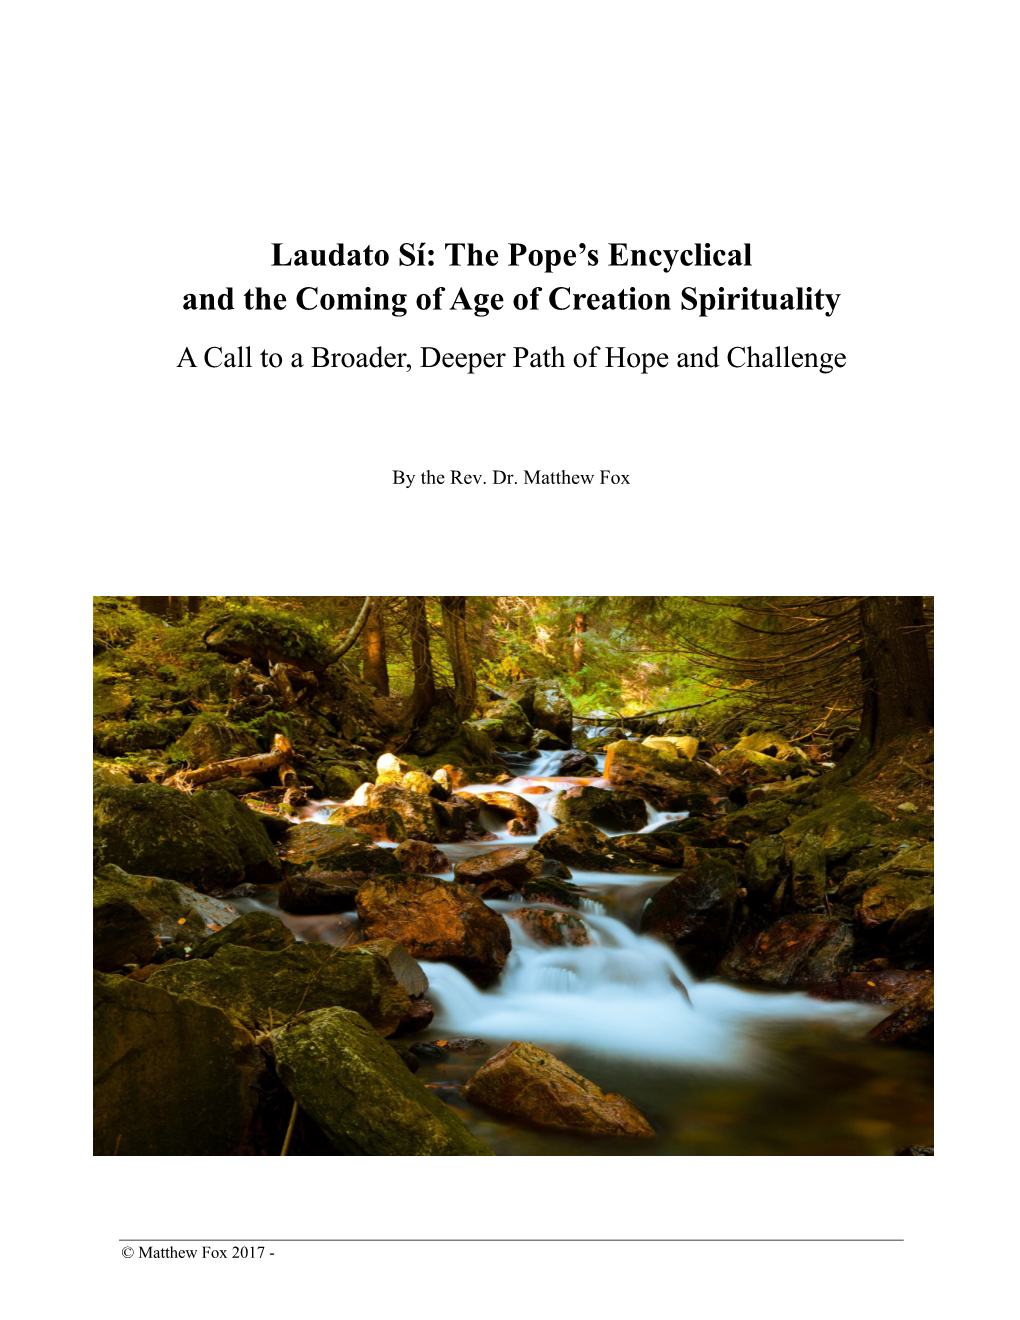 Laudato Sí: the Pope's Encyclical and the Coming Of